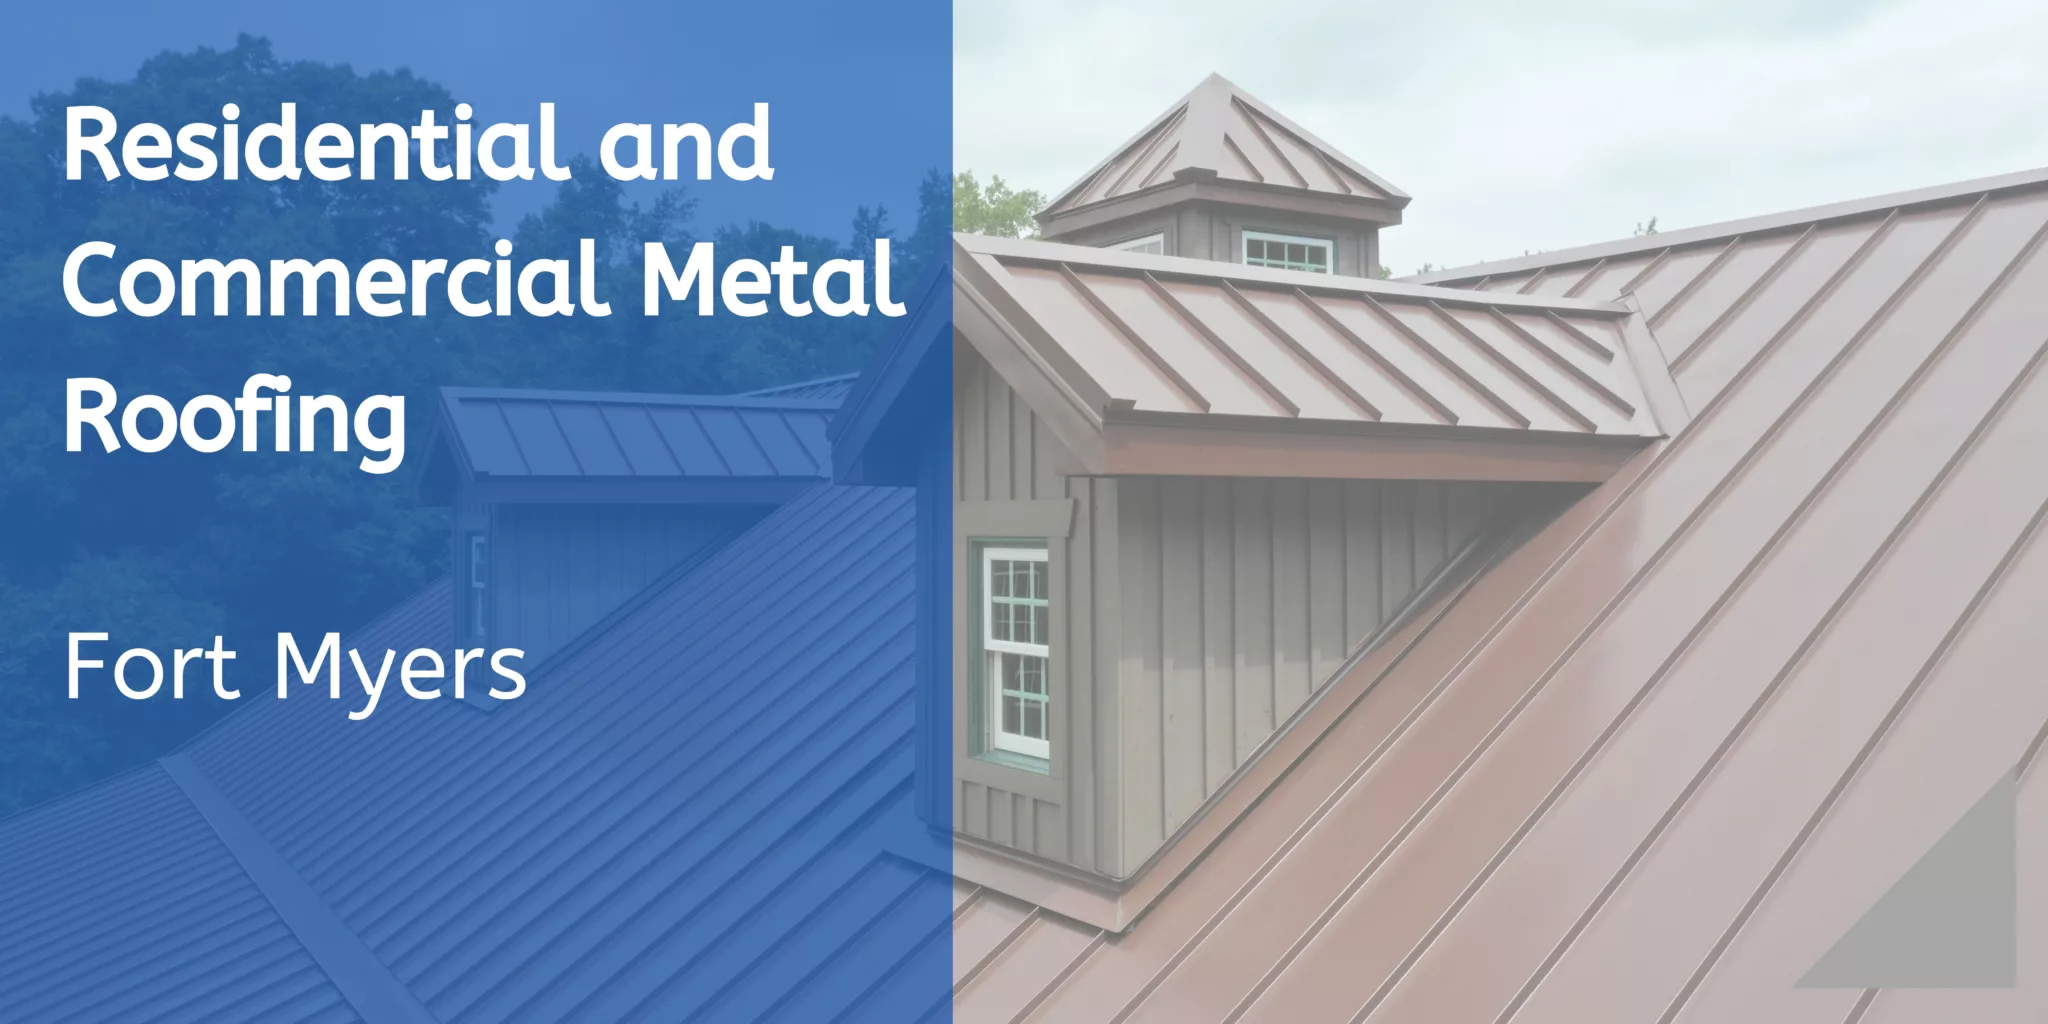 Fort Myers residential and commercial metal roofing